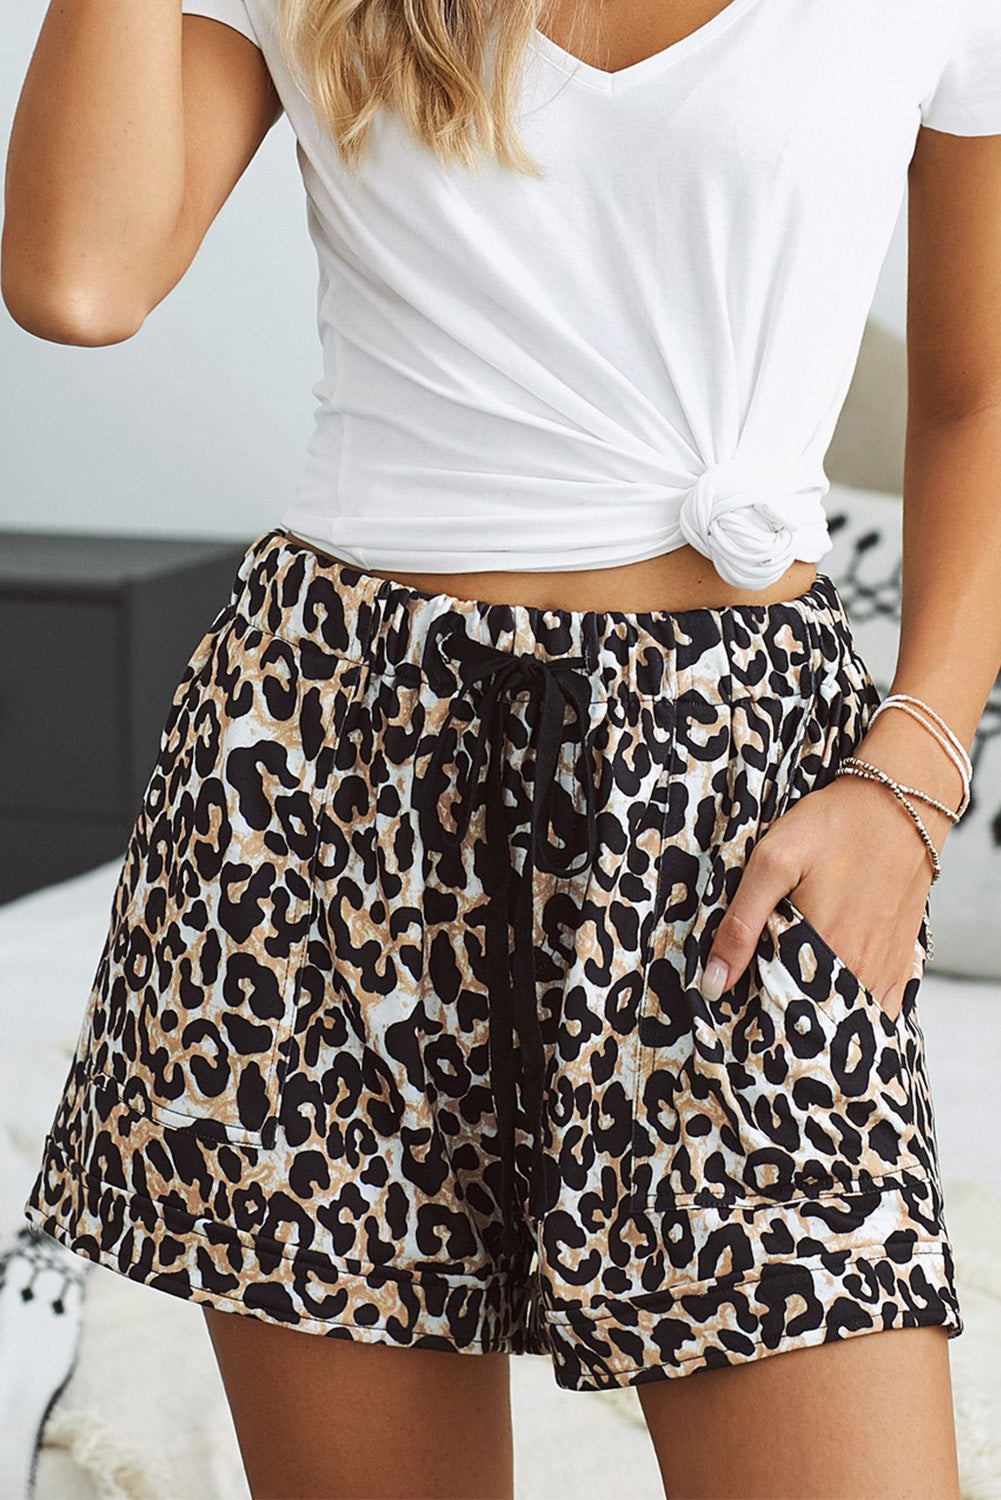 Leopard Drawstring Waist Shorts with Side Pockets - Leopard / S - Women’s Clothing & Accessories - Shorts - 1 - 2024